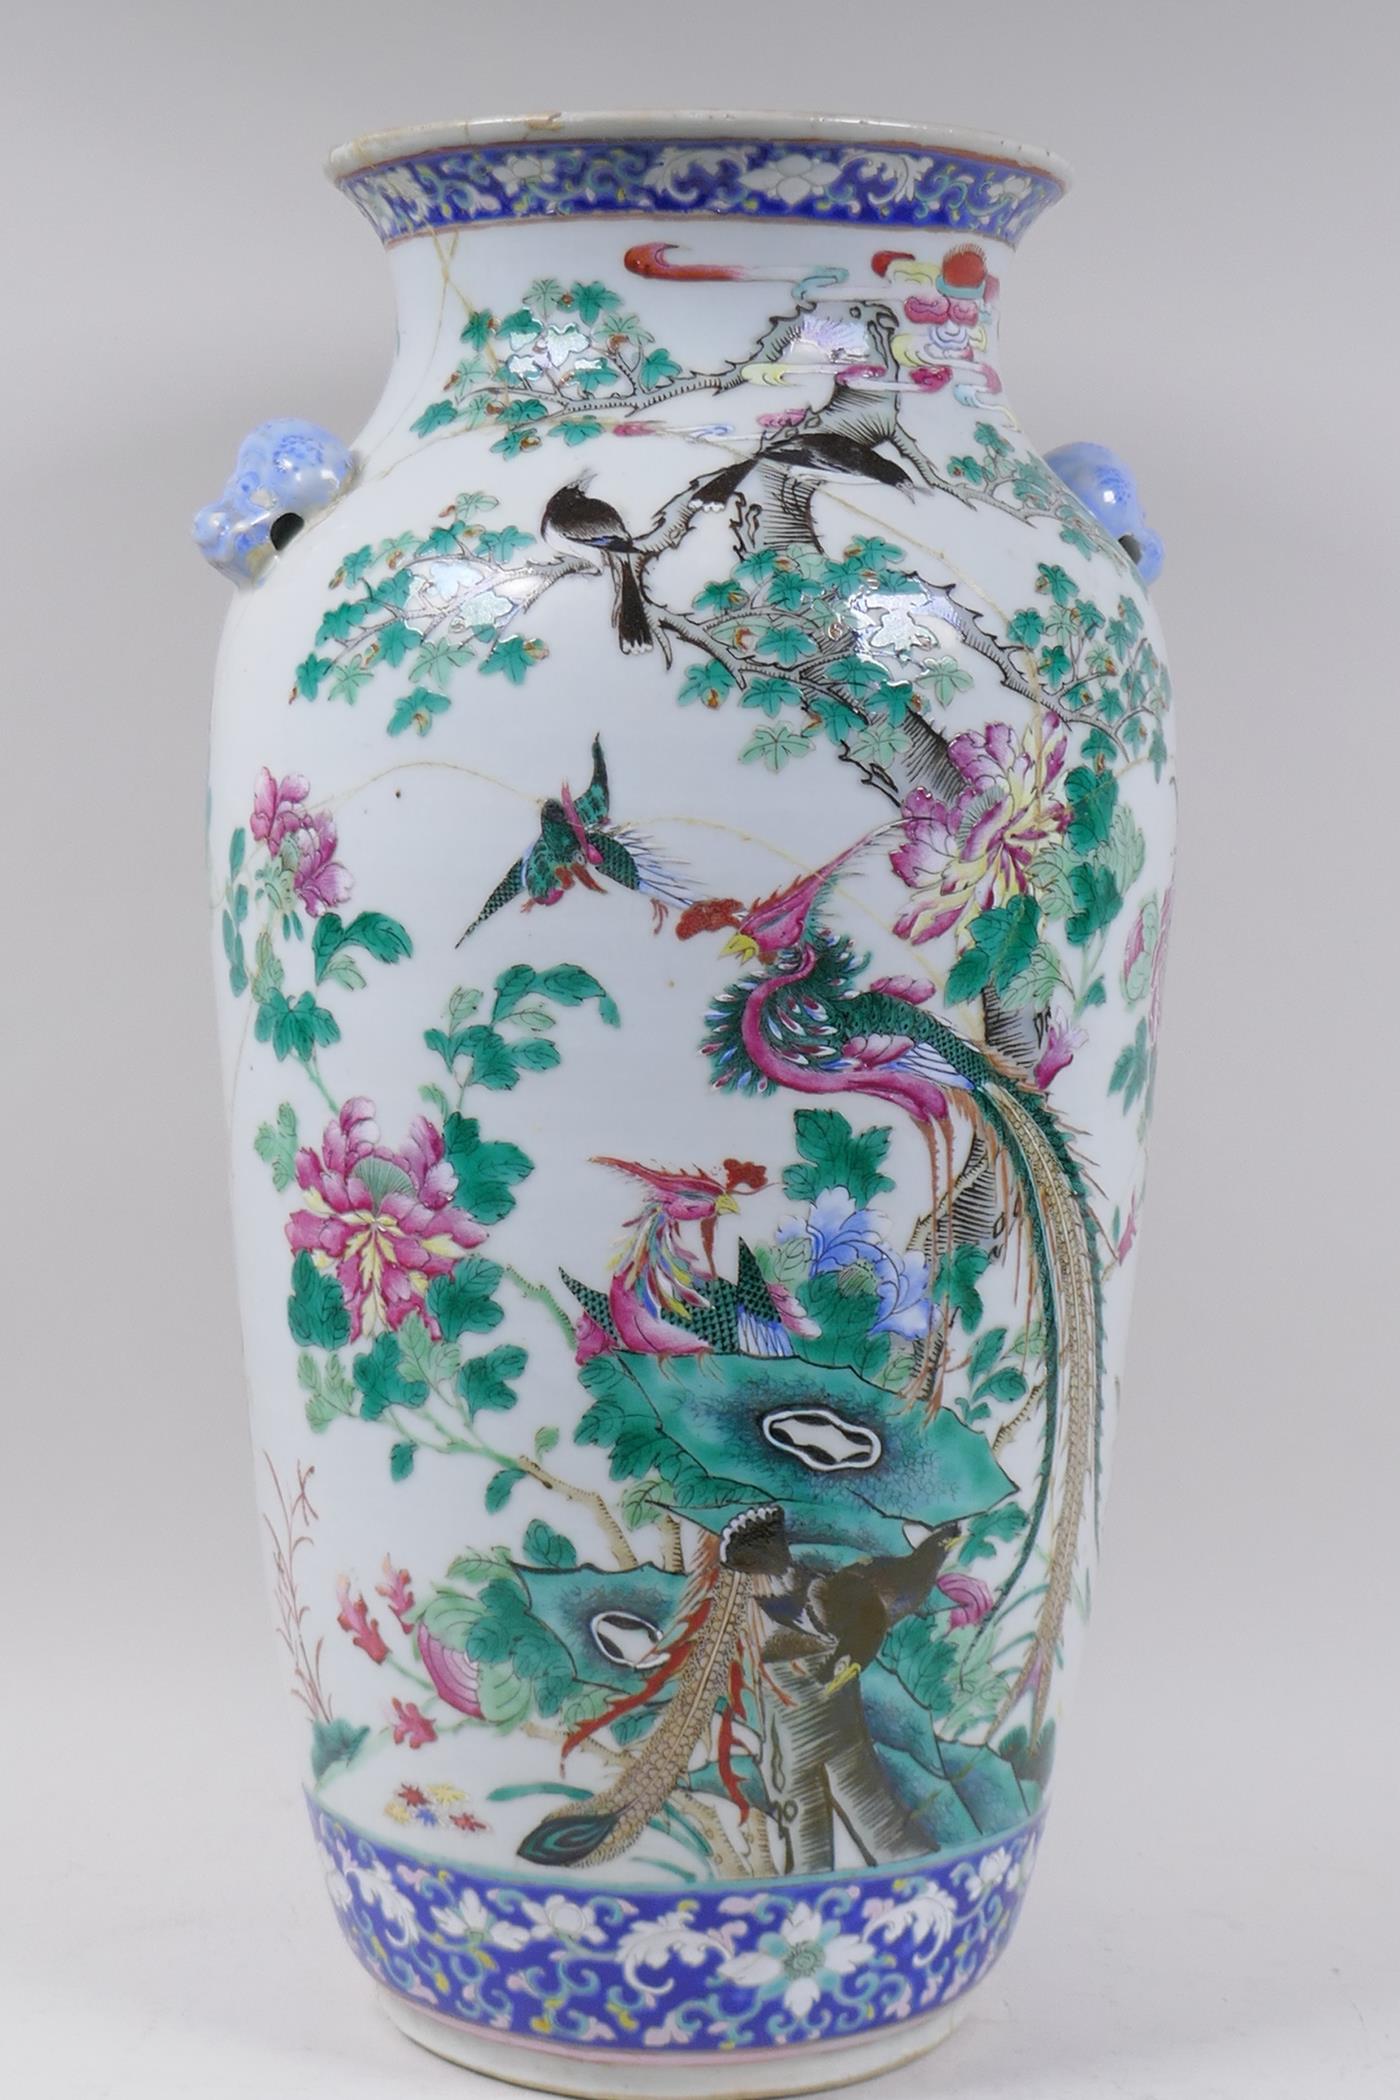 An antique Chinese vase with famille verte enamel decoration of peacocks and magpies, broken and